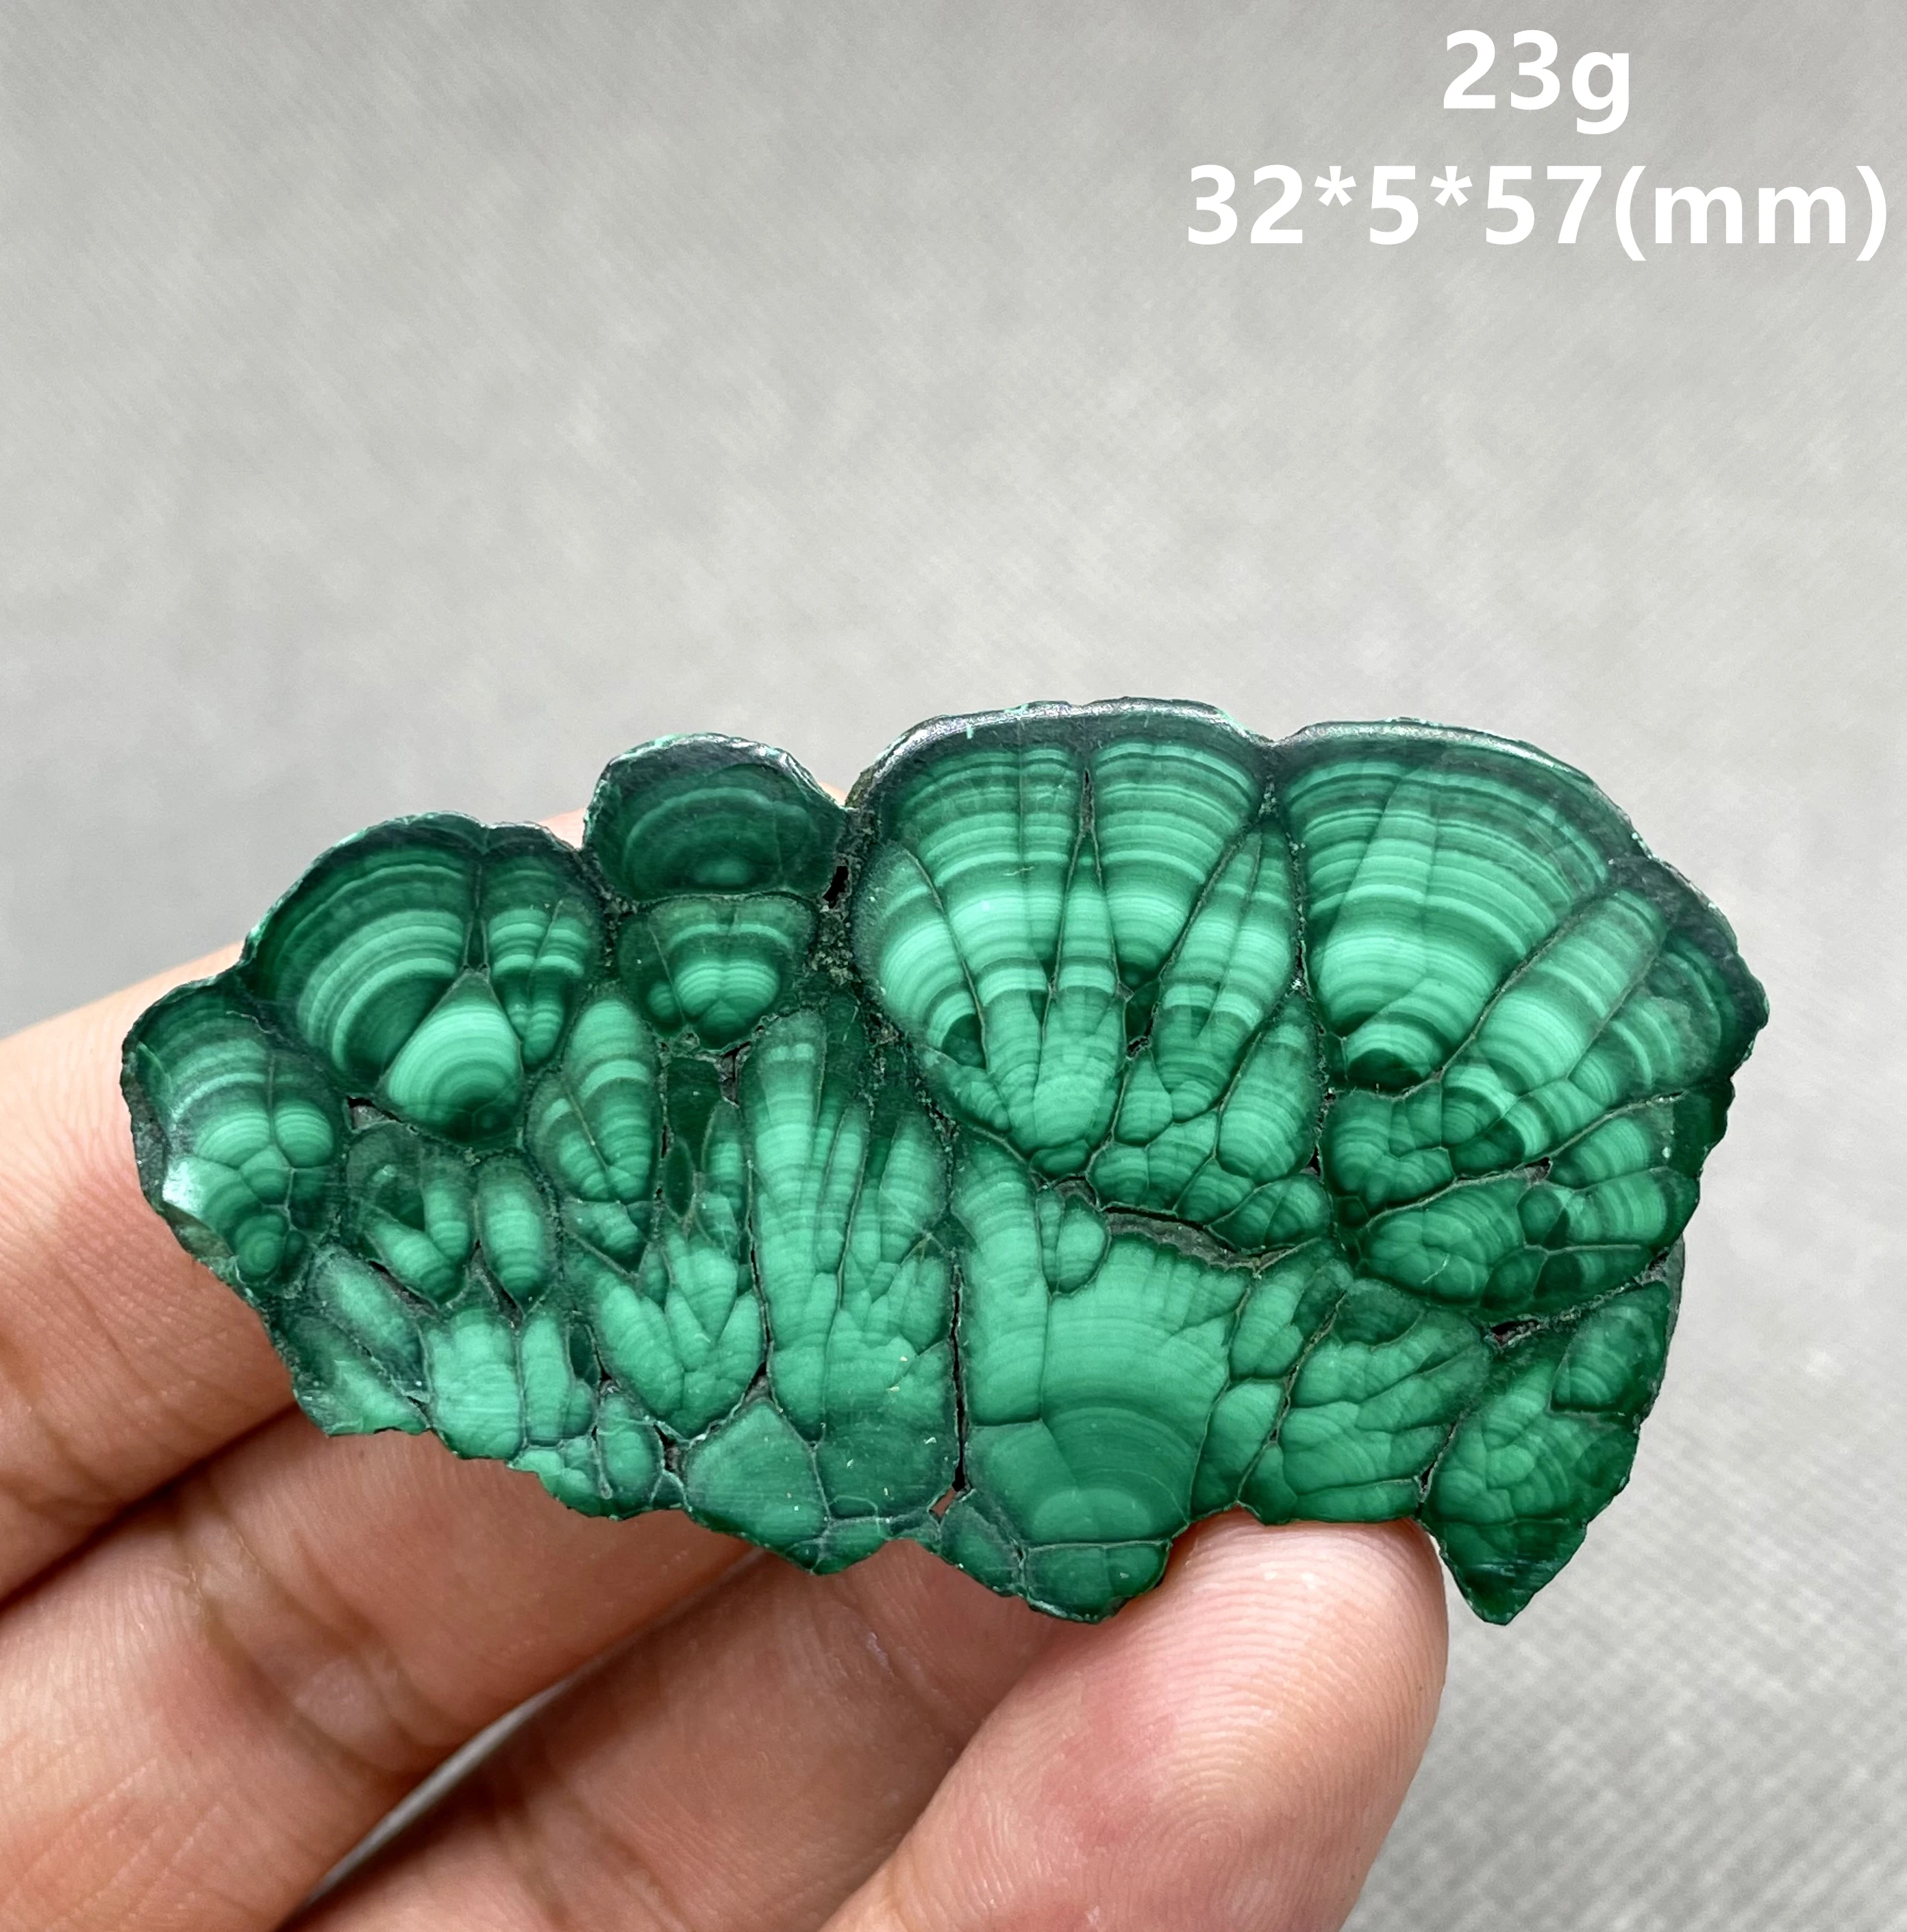 

NEW! 100% Natural green malachite polished mineral specimen slice rough stone quartz Stones and crystals Healing crystal